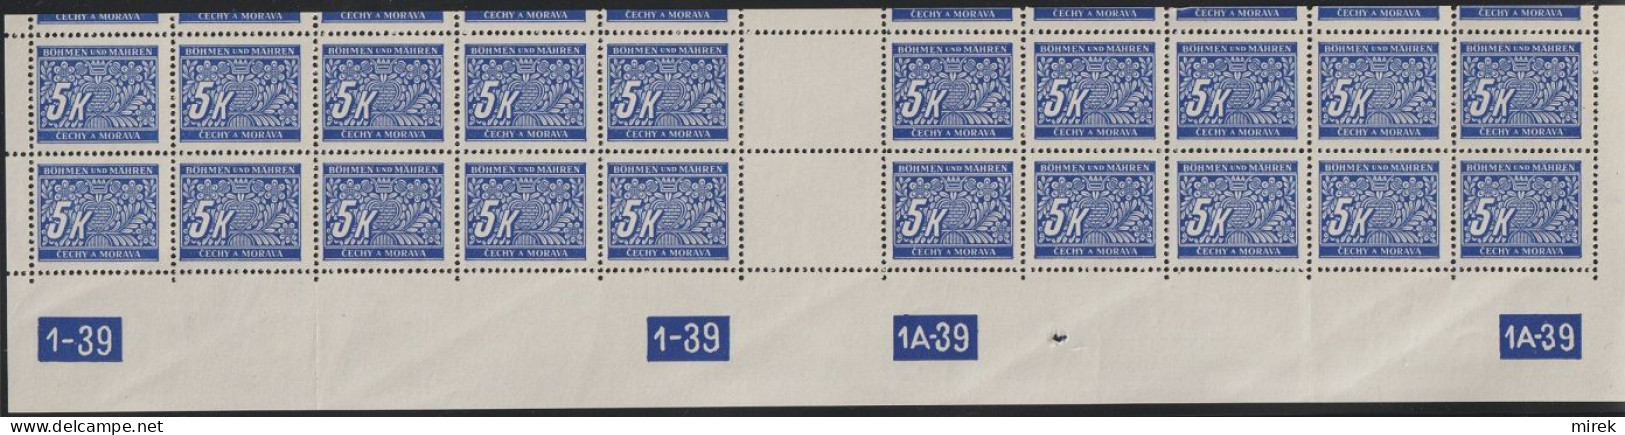 086/ Pof. DL 12, Cut Horizontal Interarchs Strip, Plate Numbers 1-1A-39 - Unused Stamps